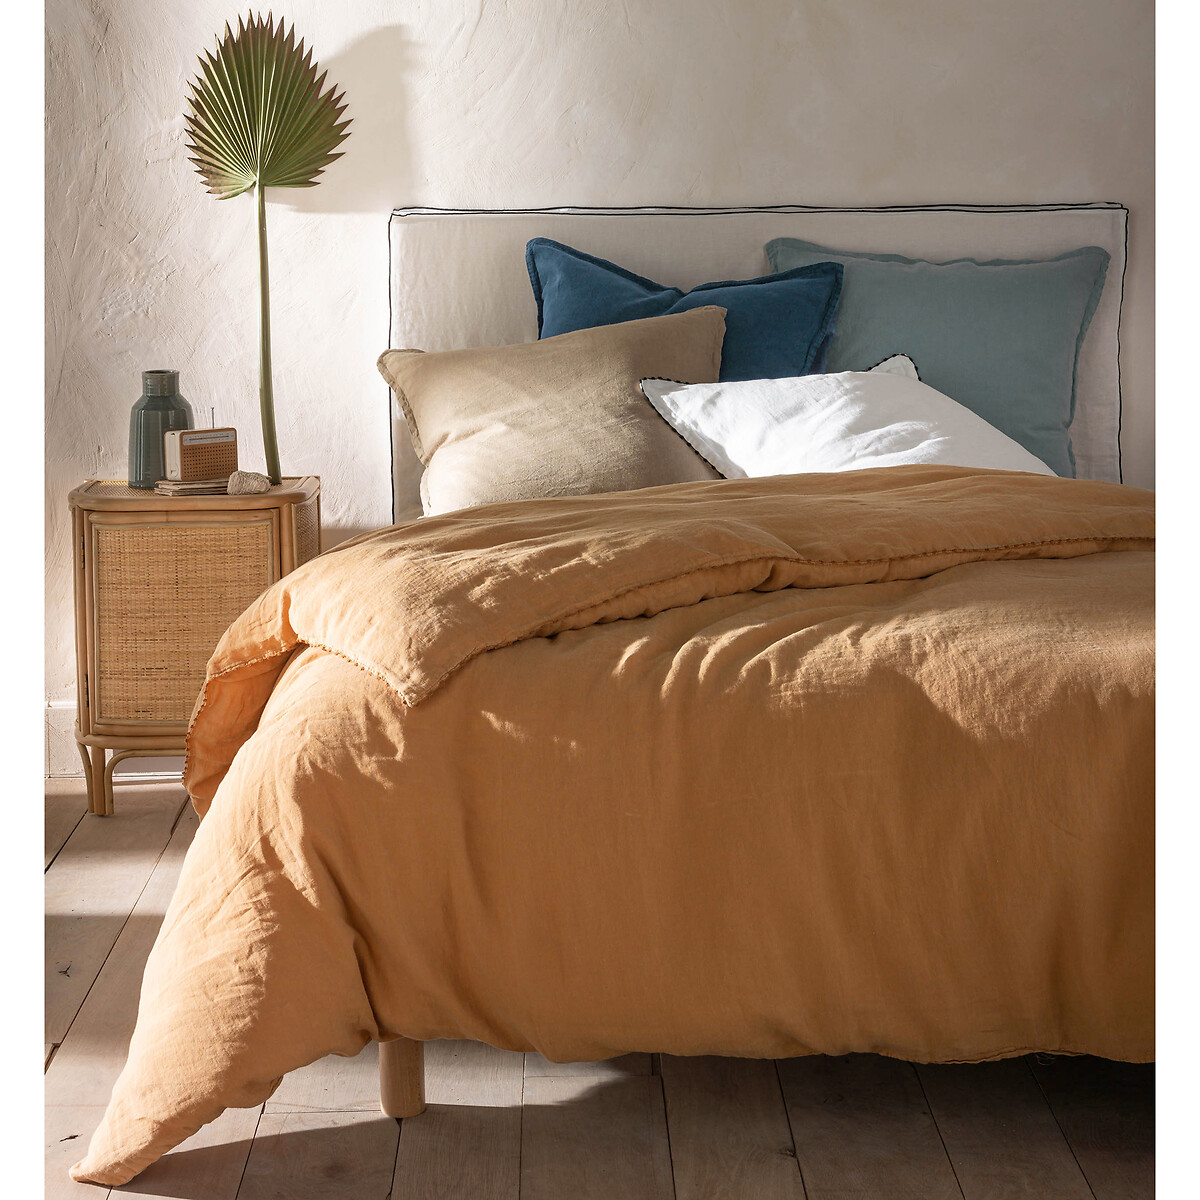 Washed Linen Duvet Cover La Redoute, Duvet And Bed Covers